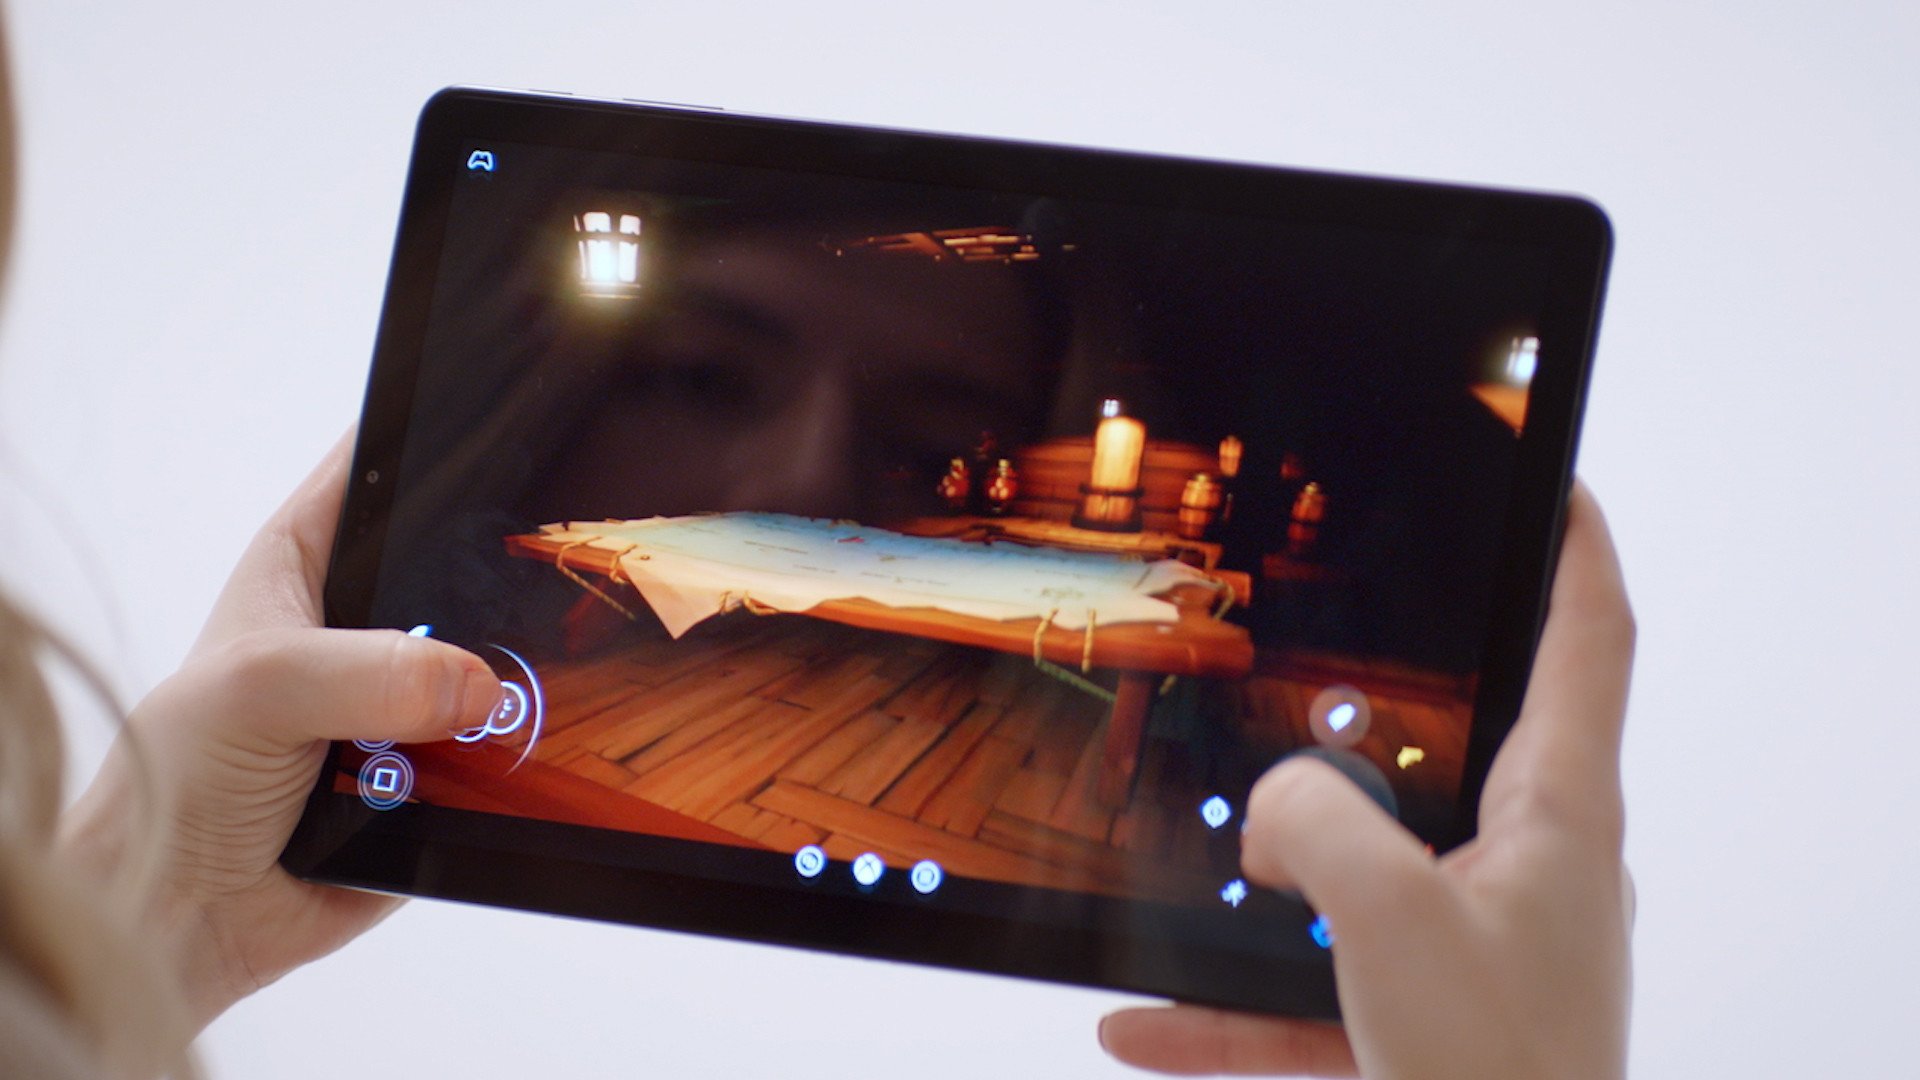 Microsoft unveils Xbox Project xCloud game streaming